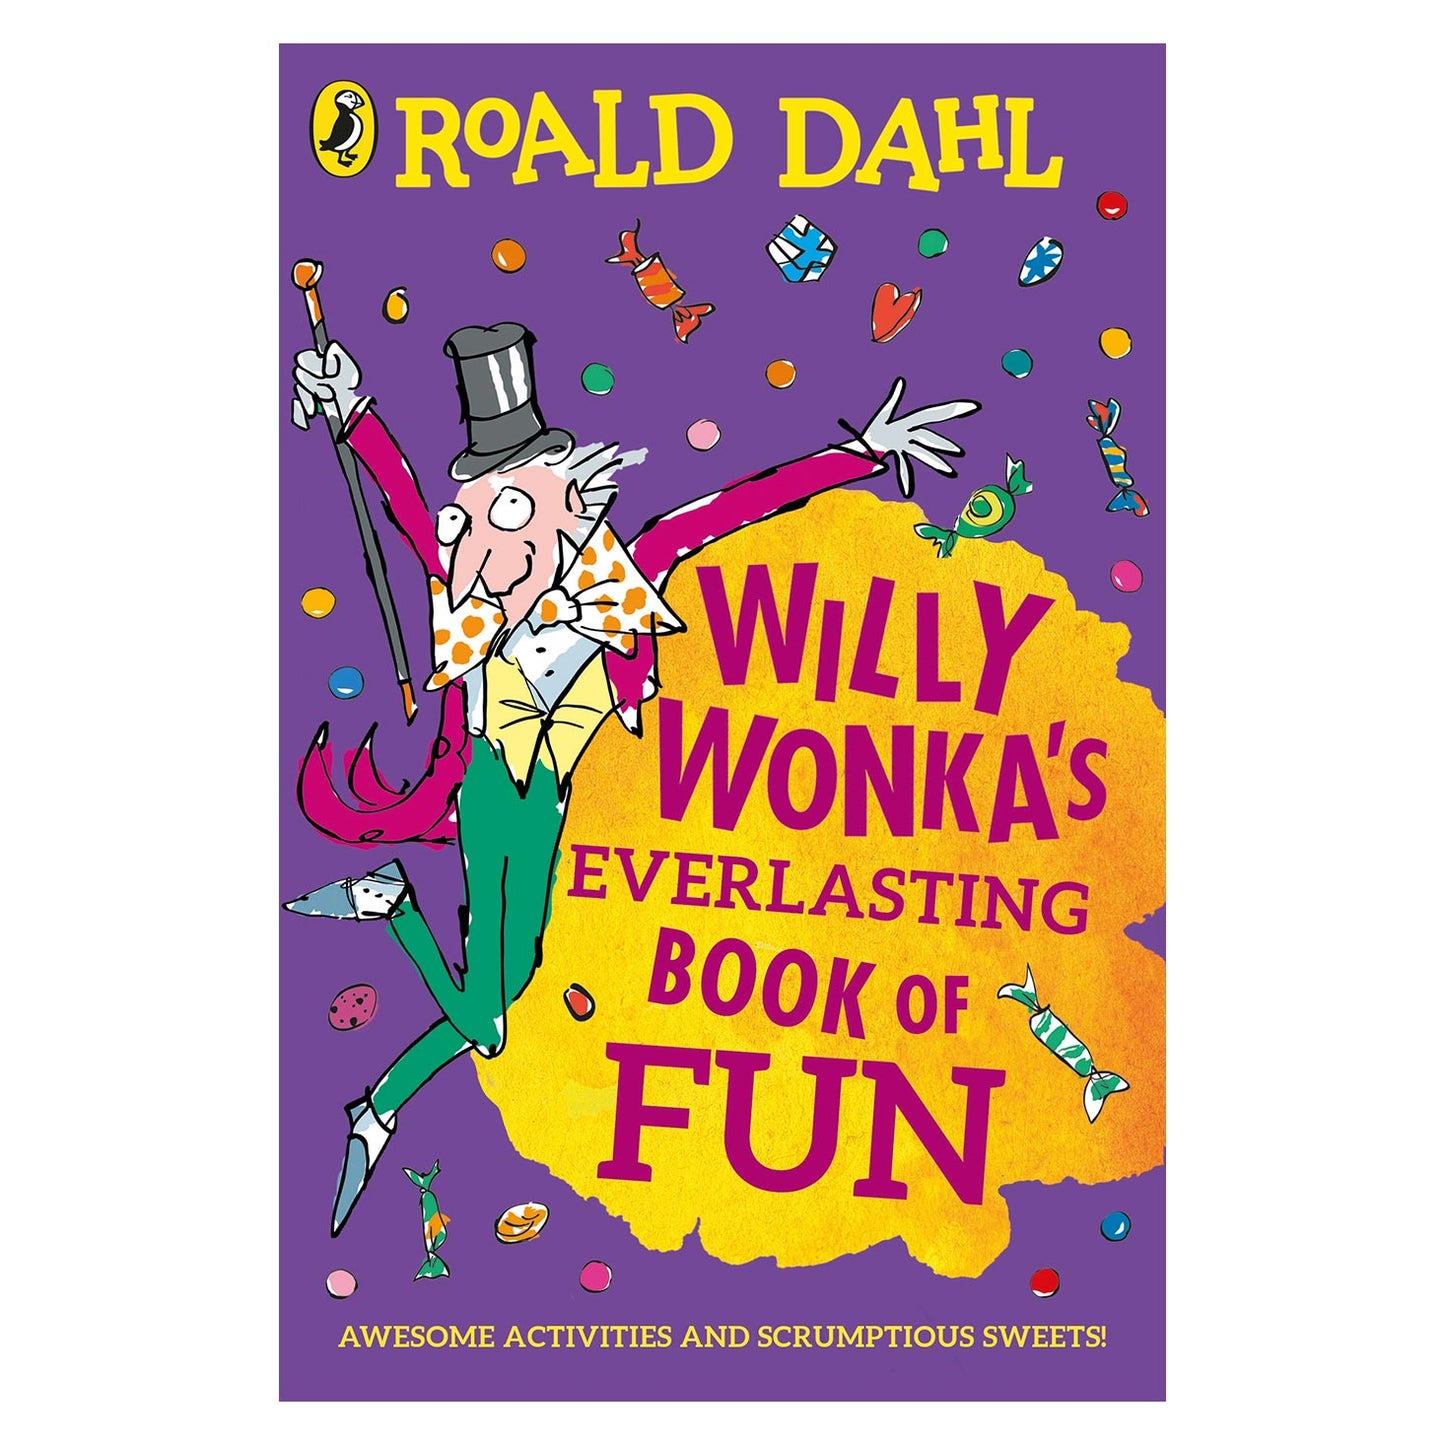 Willy Wonka's Everlasting Book of Fun by Roald Dahl and Quentin Blake